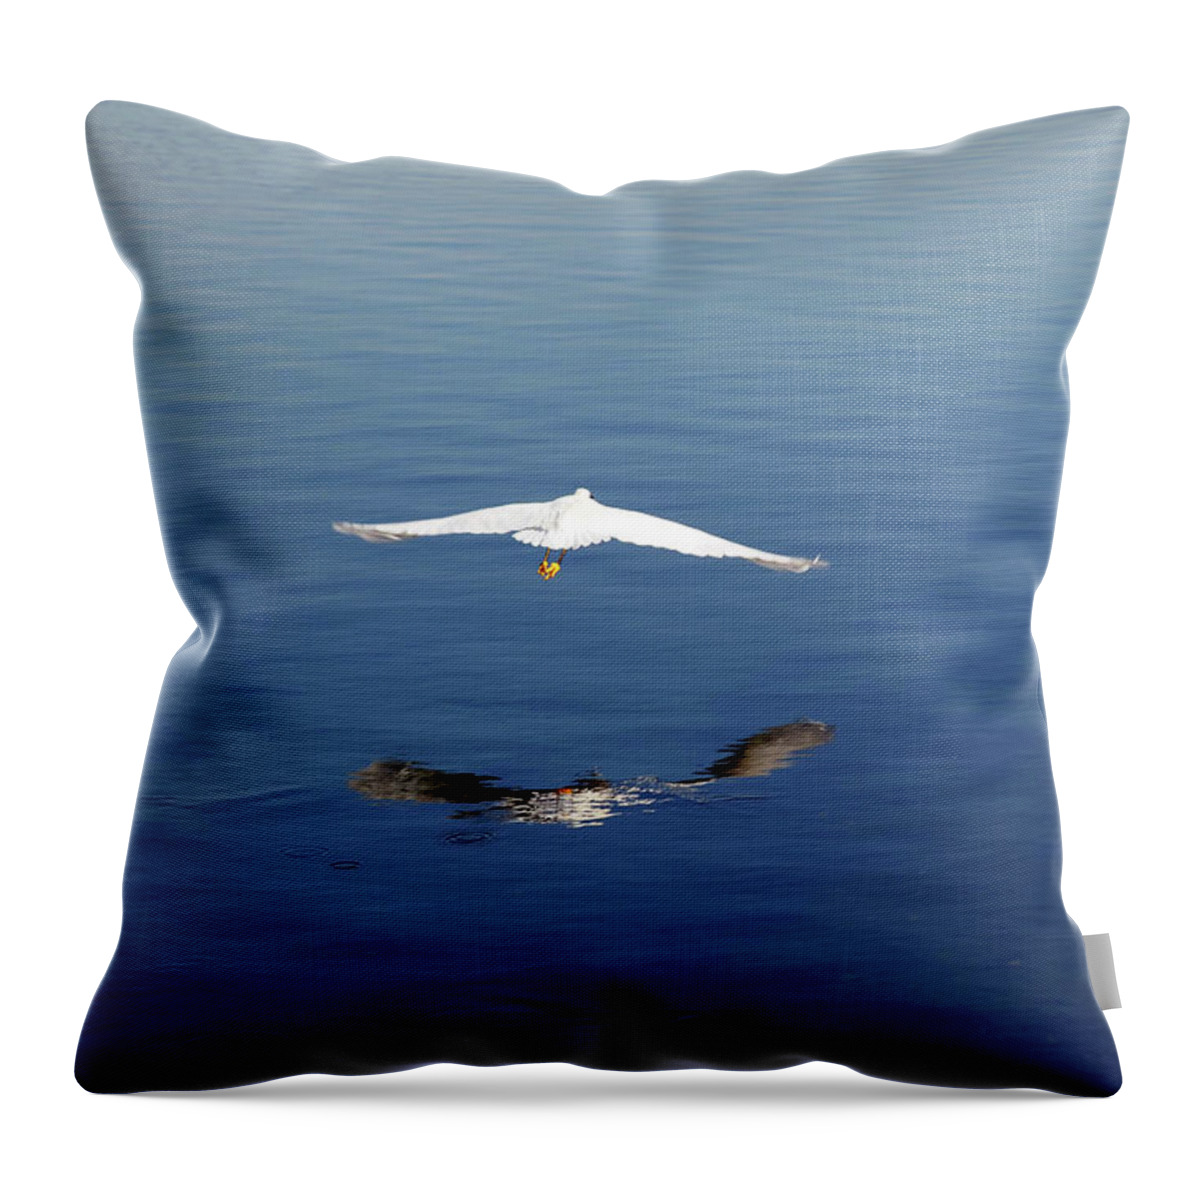 Egret Throw Pillow featuring the photograph Glidepath by Joe Schofield